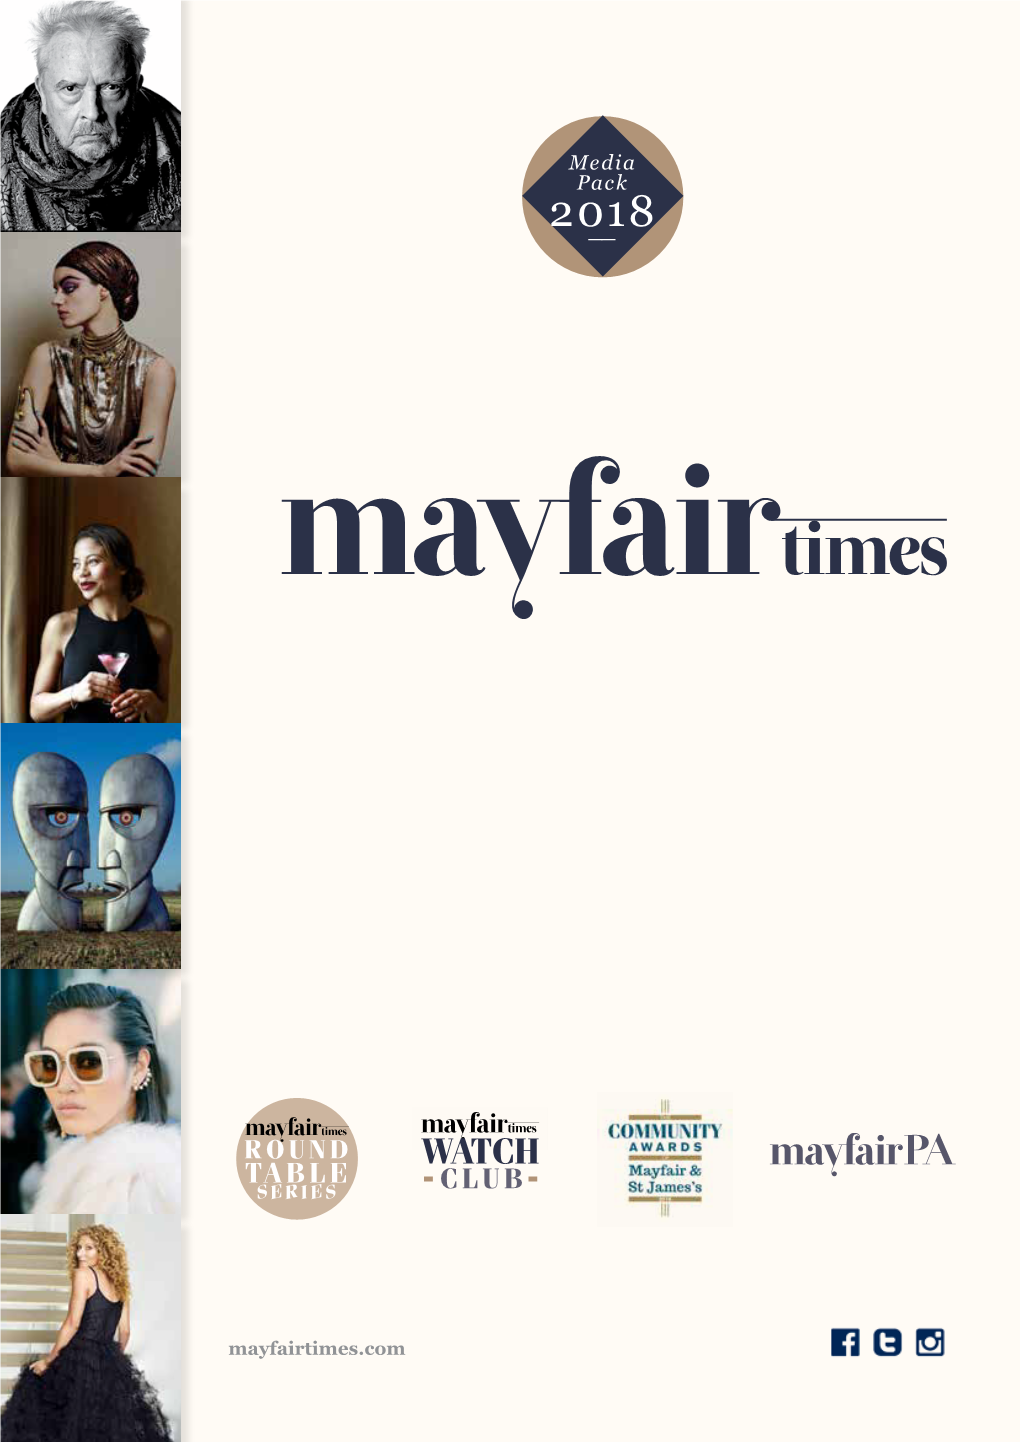 Mayfair Times Is About Individuals Who Make a Difference, and the Magazine Aptly Celebrates This Fact